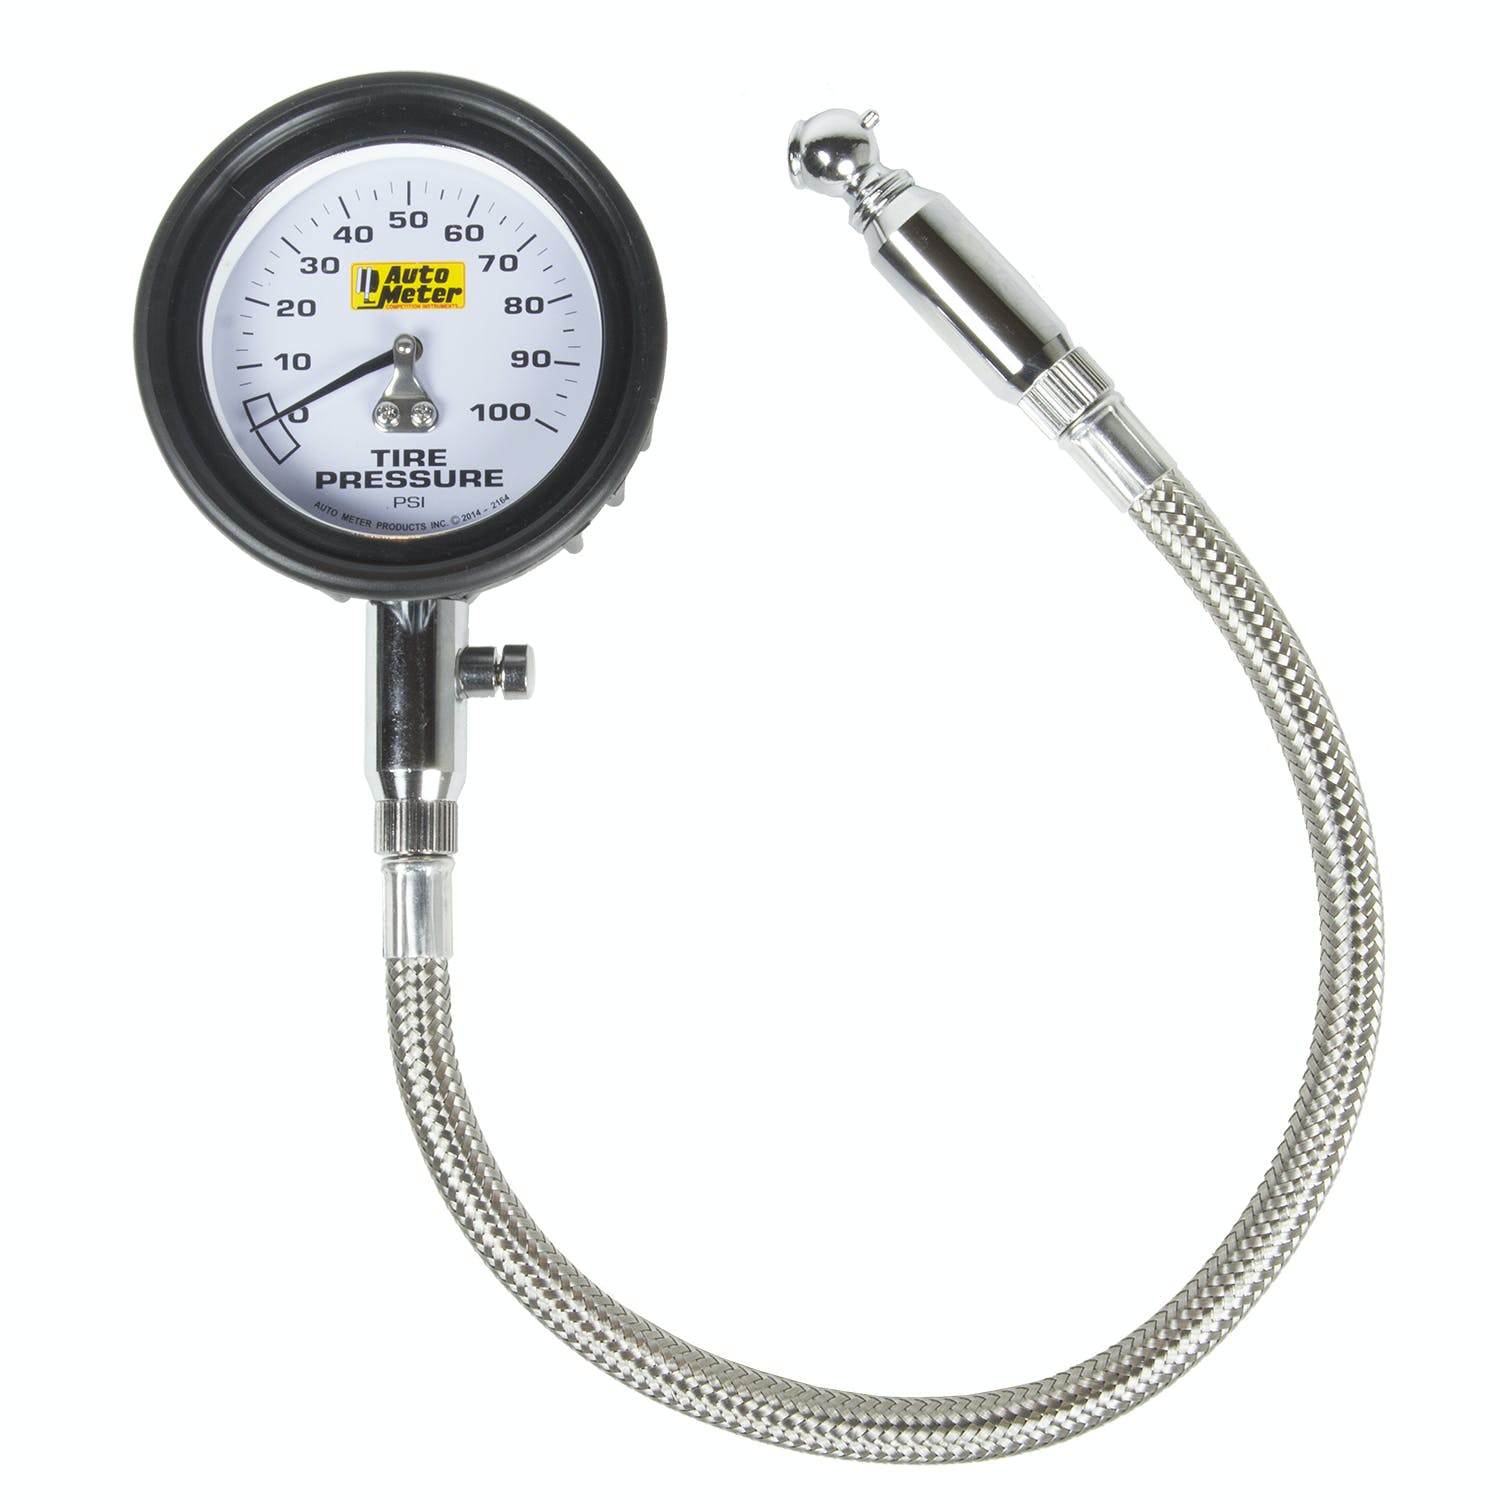 AutoMeter Products 2164 Professional-Grade Tire Pressure Gauge (0-100 PSI)